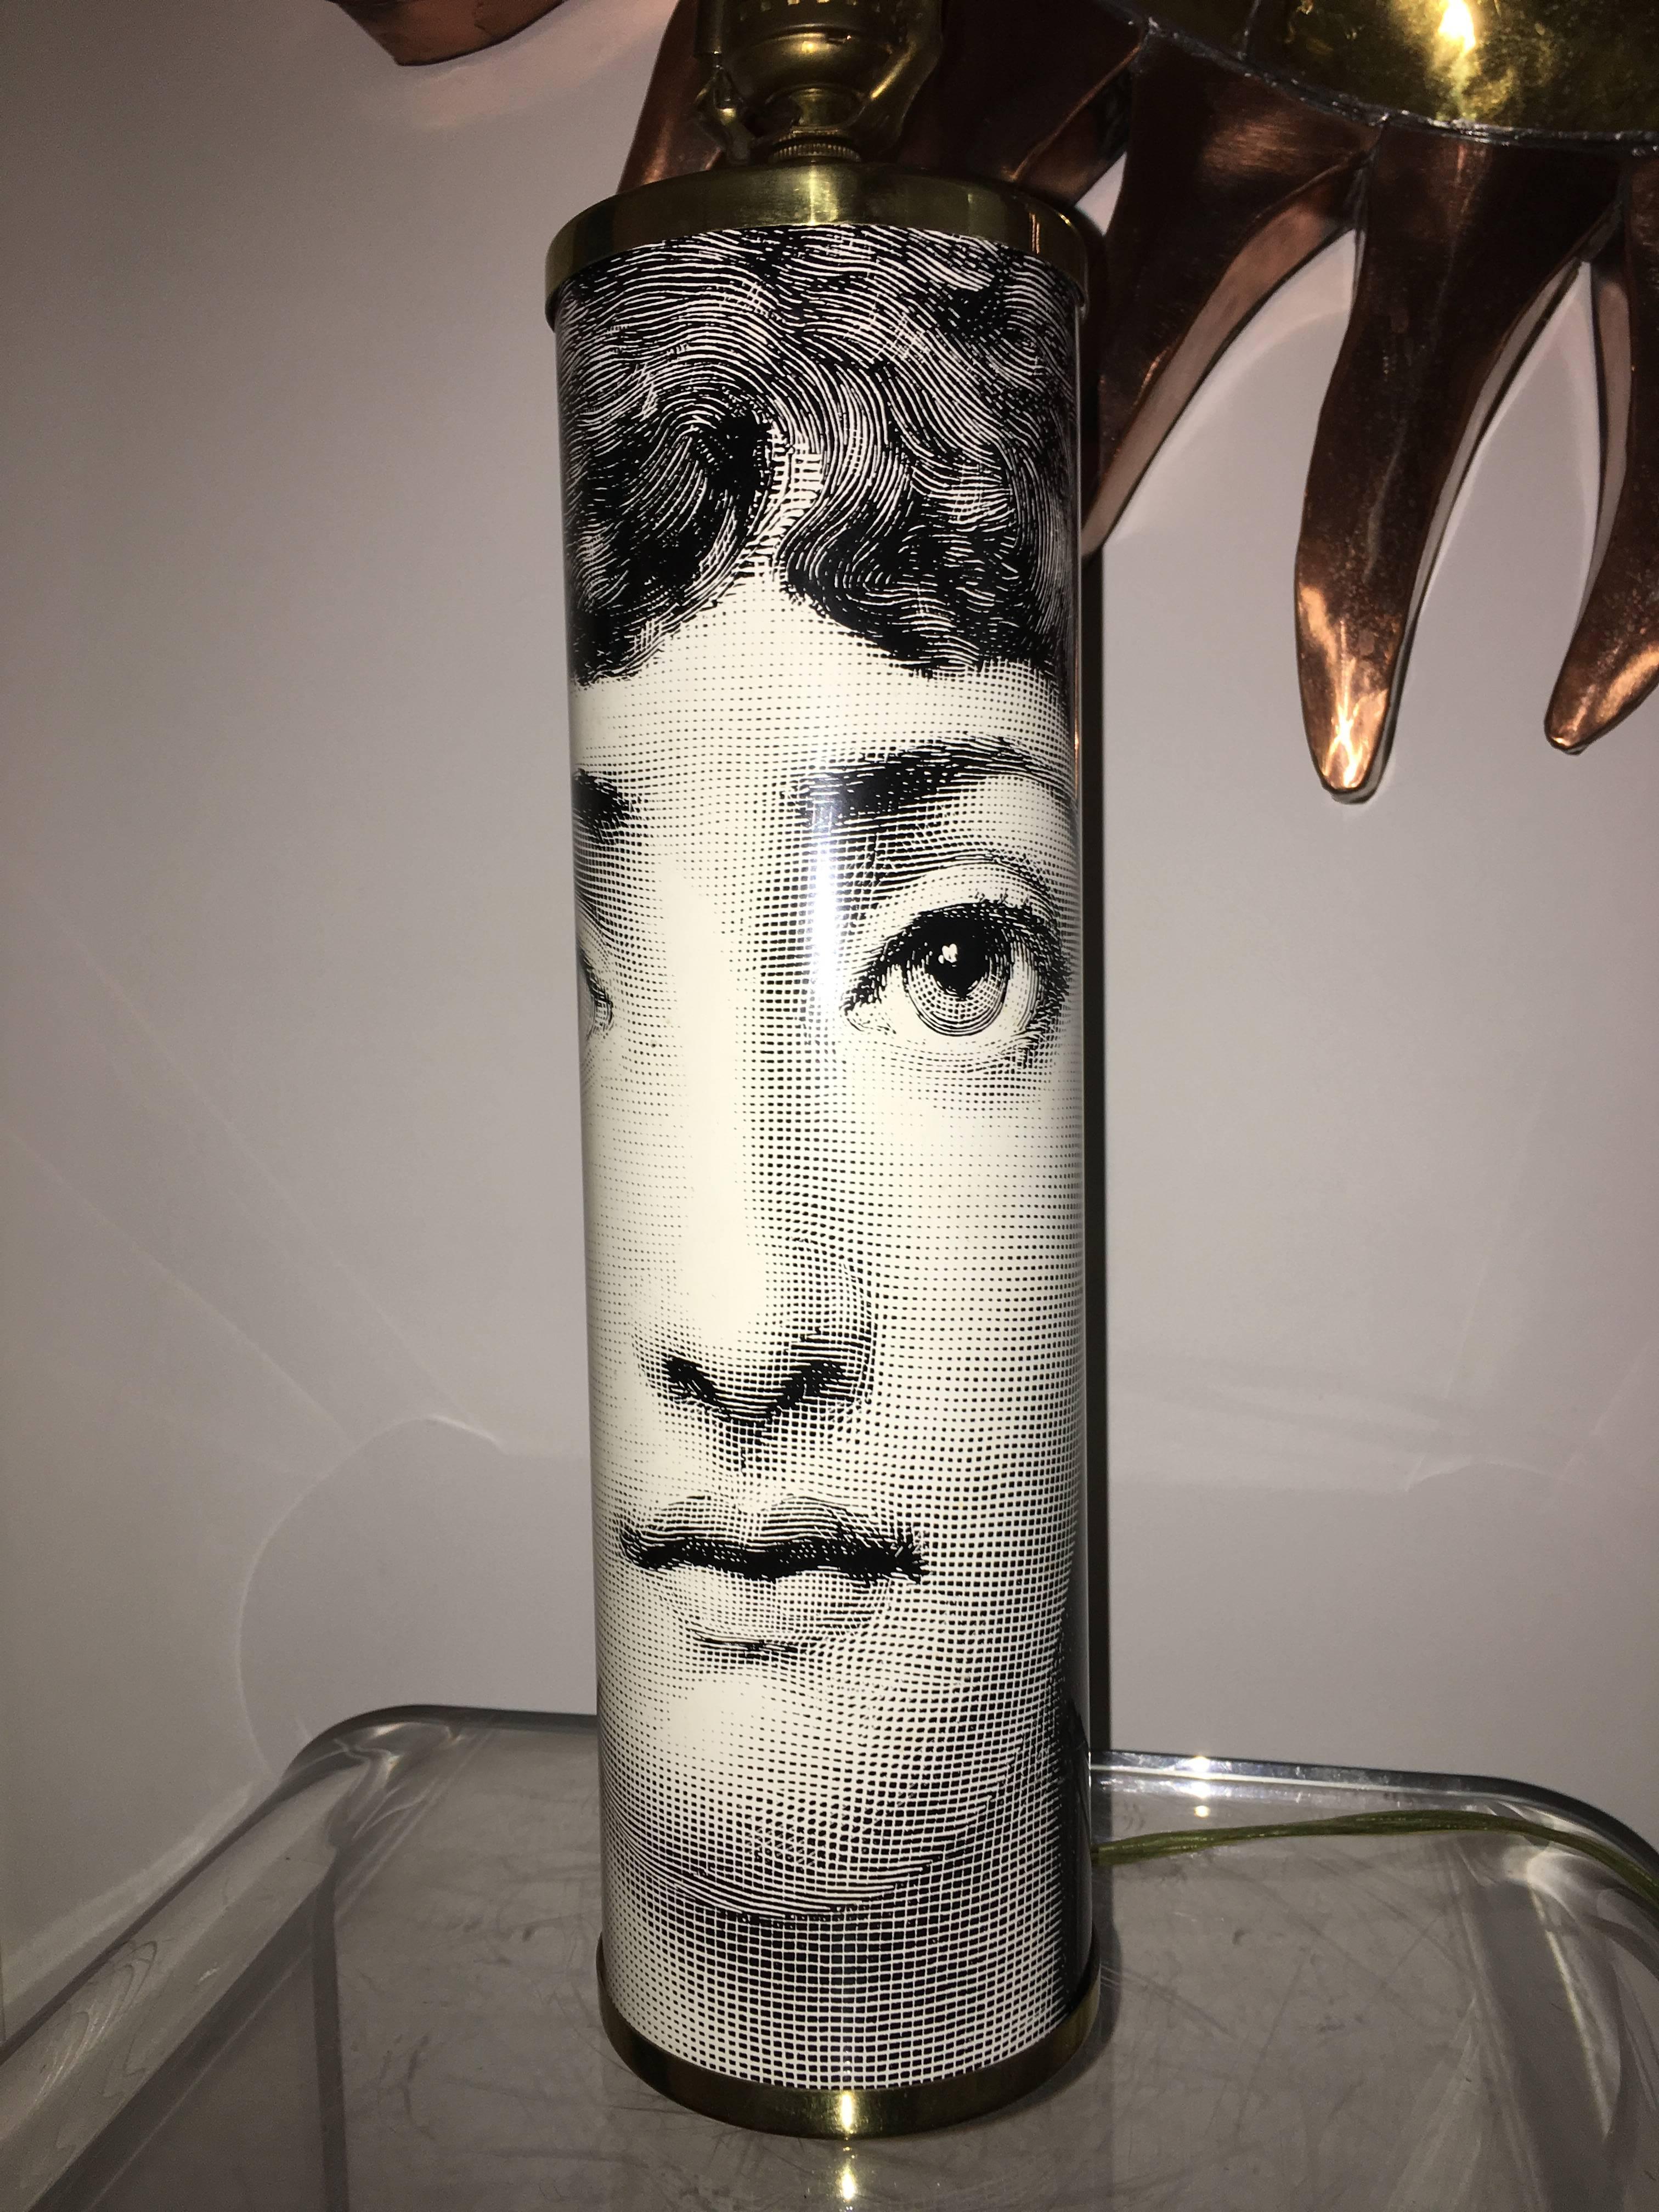 Exceptional vintage Julia table lamp by Piero Fornasetti. This Classic design features the black and white face with brass hardware. Signed Fornasetti in two locations. Comes with brass harp and finial. Guaranteed authentic.